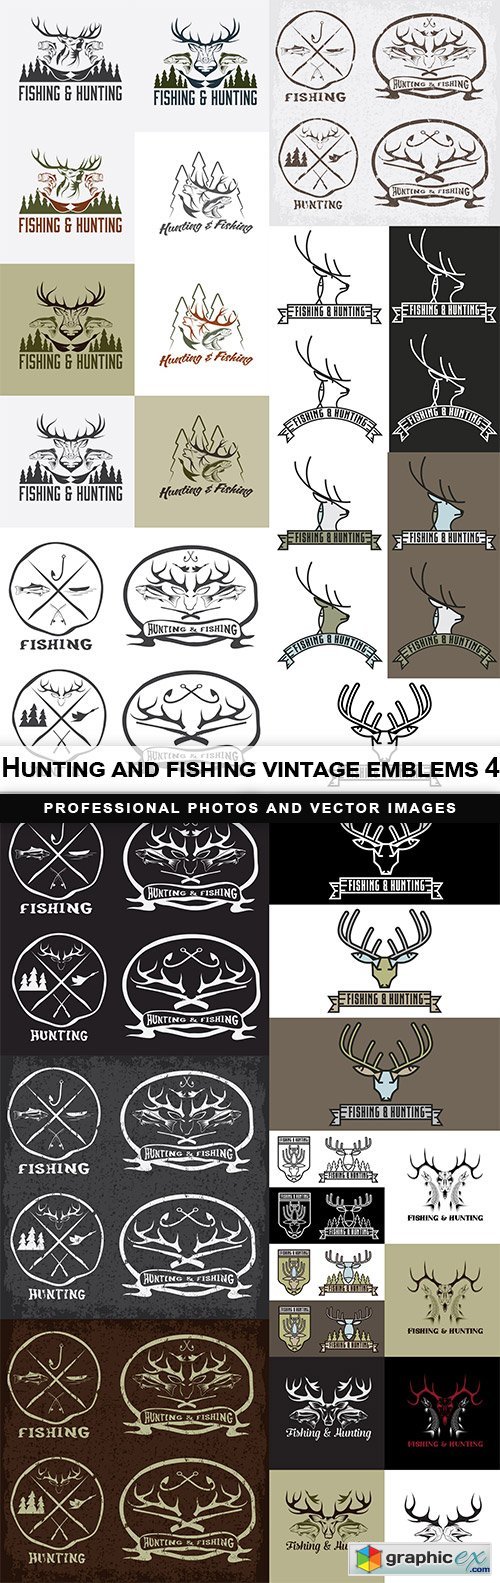 Hunting and fishing vintage emblems 4